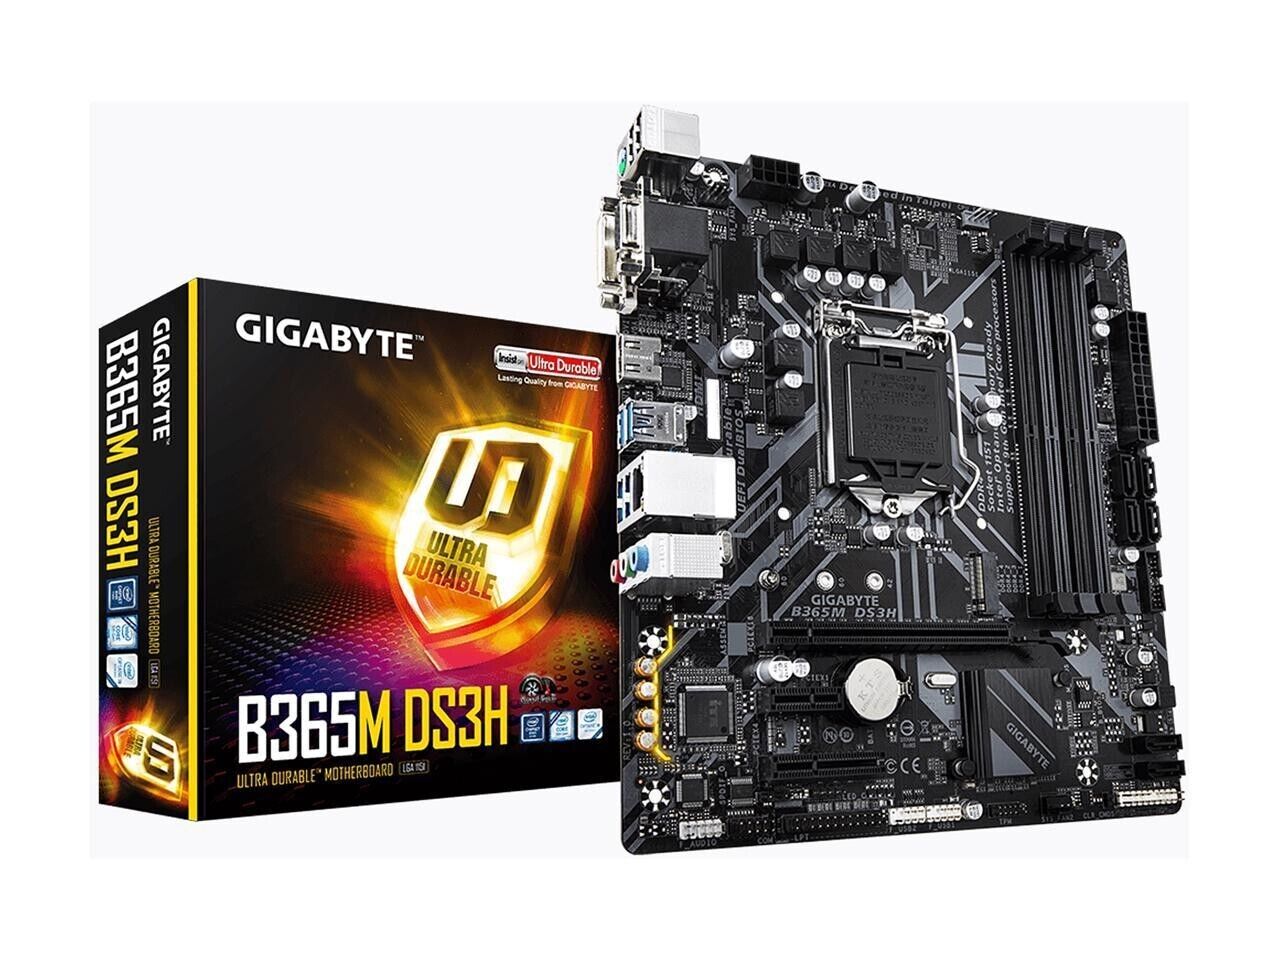 GIGABYTE B365M DS3H LGA 1151 Intel B365 SATA 6Gb/s M-ATX Intel Motherboard NEW